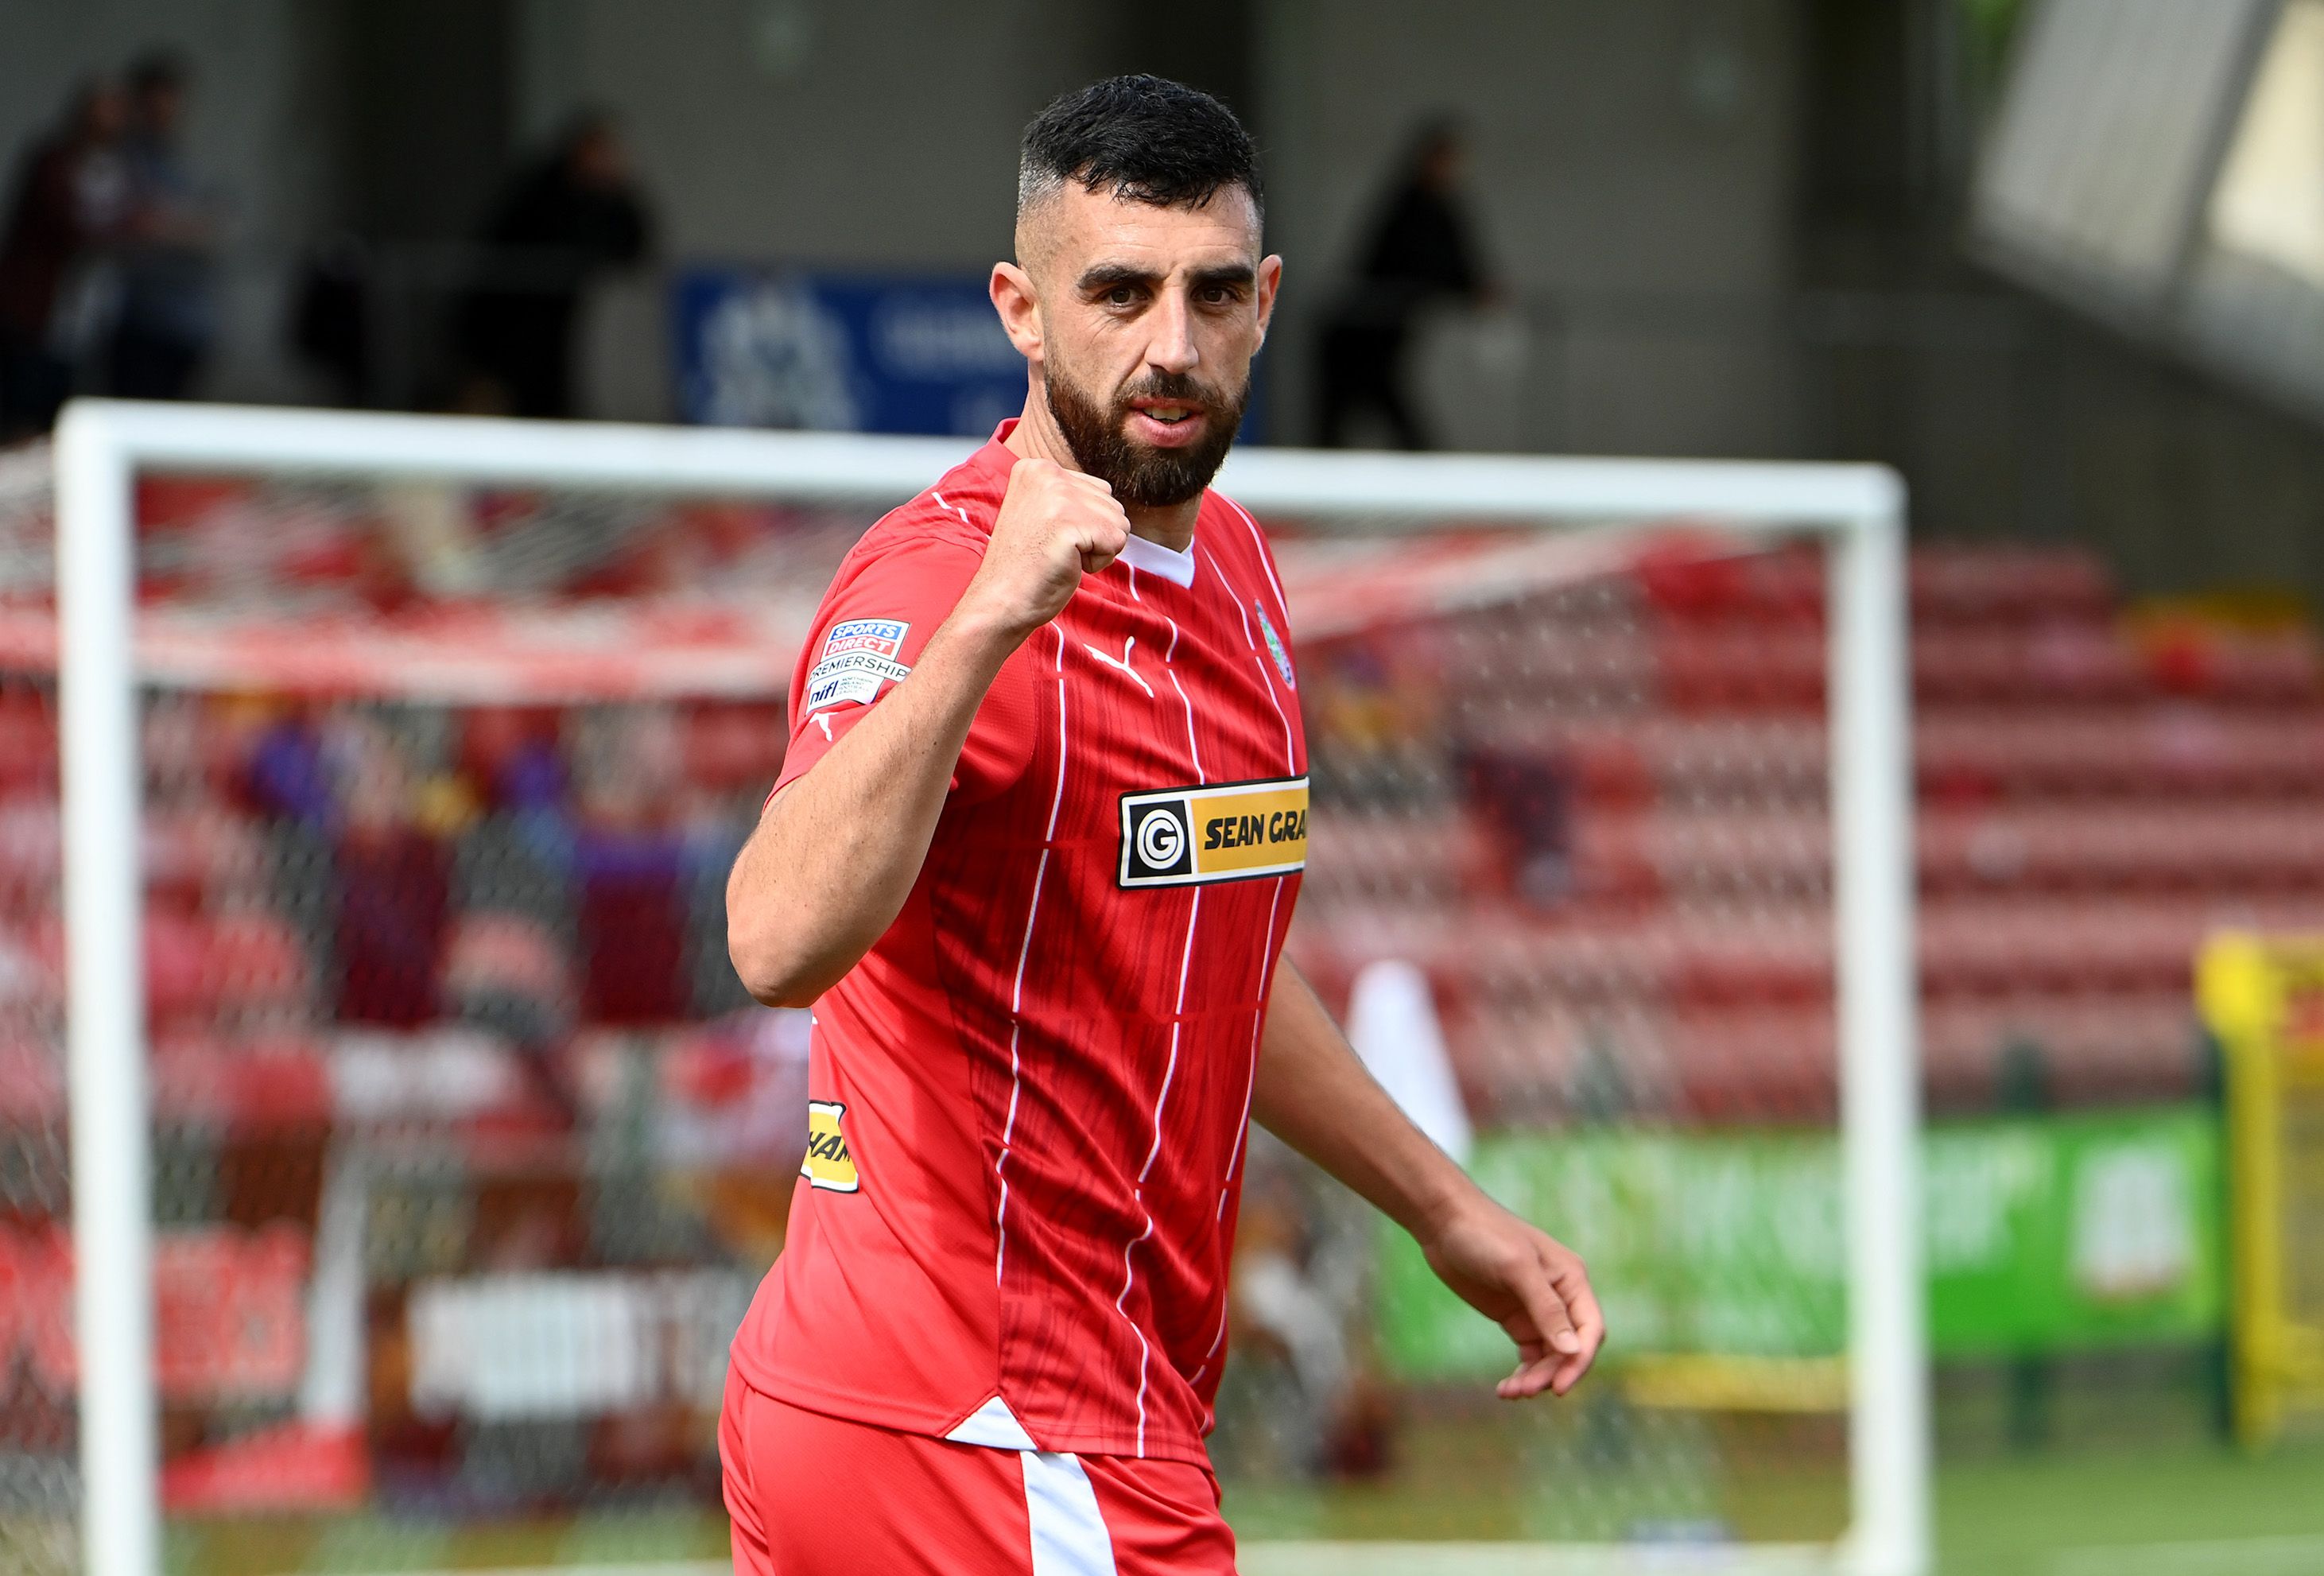 Joe Gormley netted a hat-trick on Wednesday 